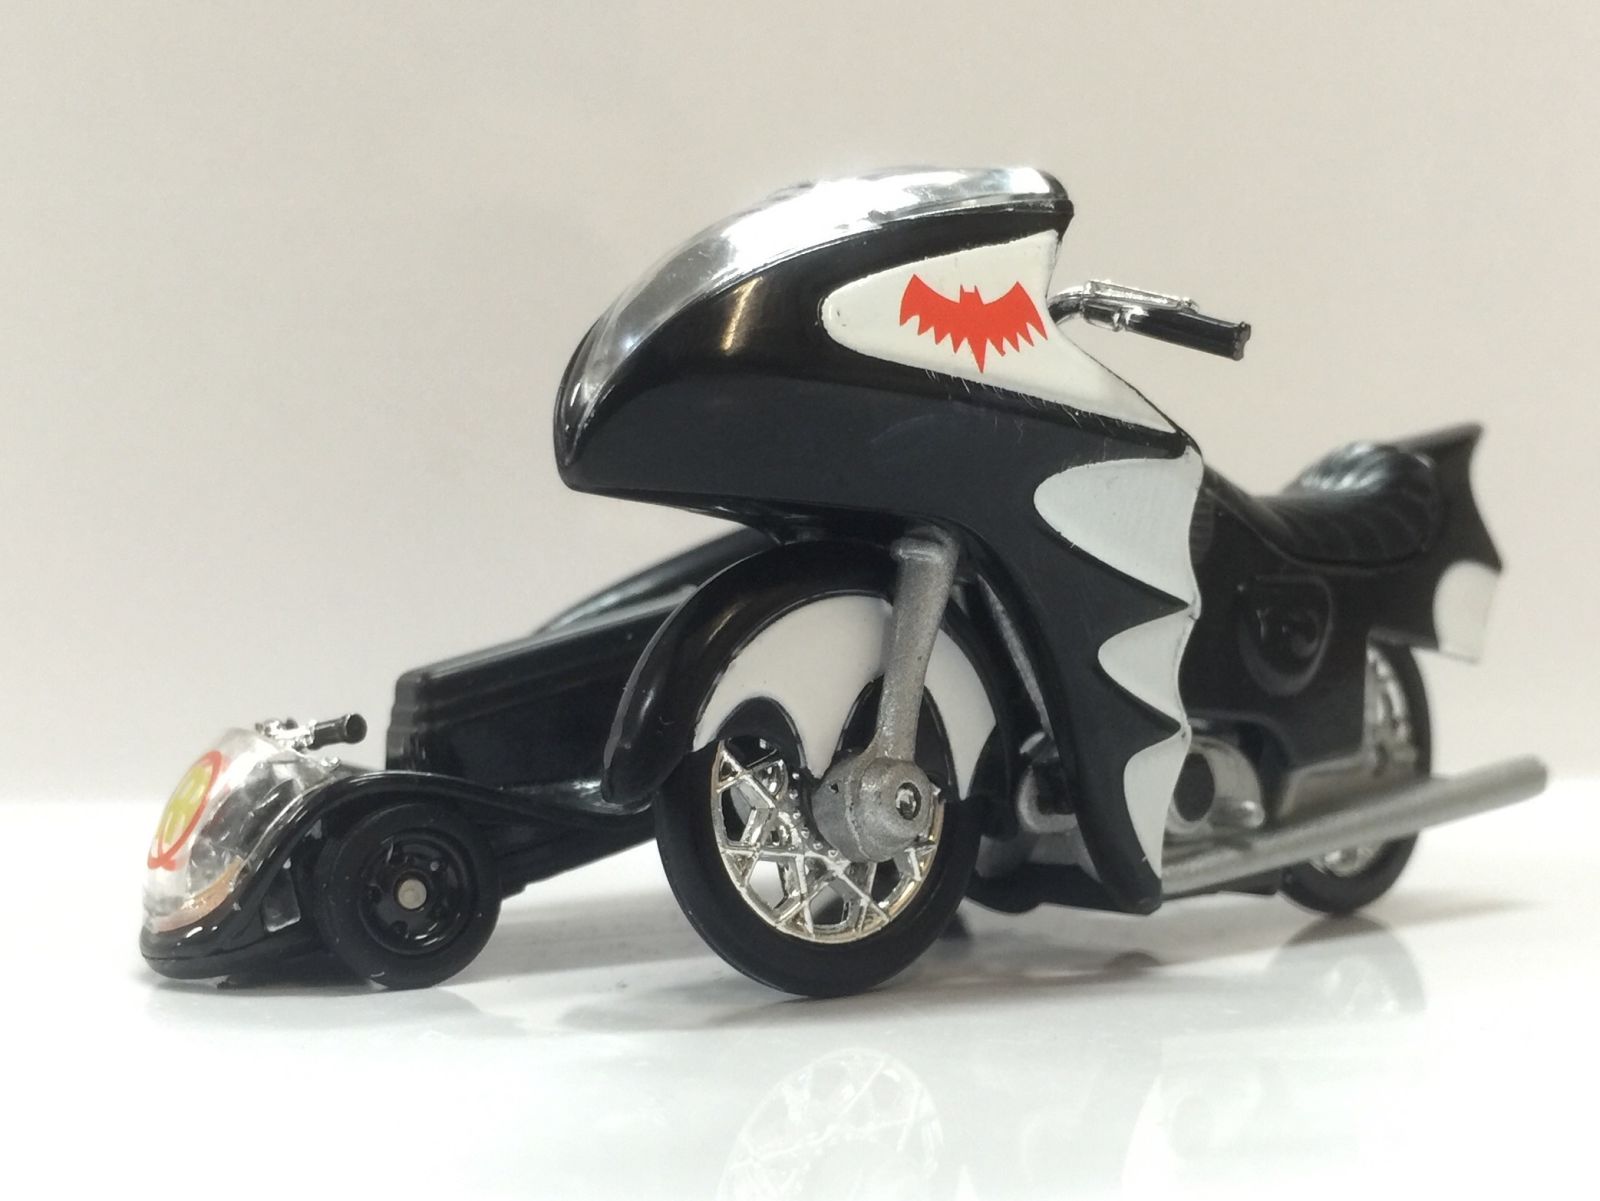 Illustration for article titled Batcycle; Why I like the DLM